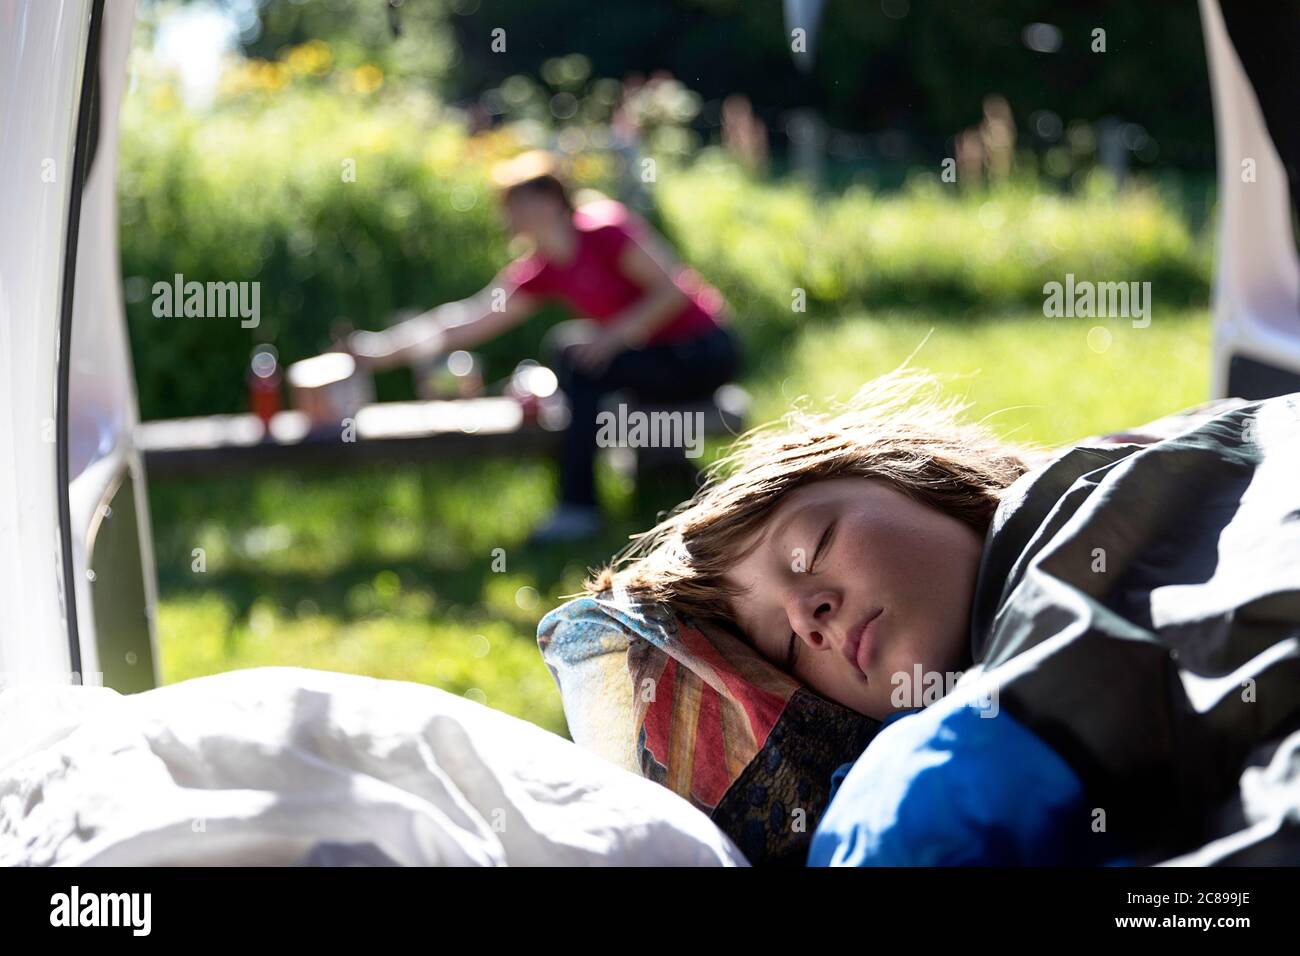 Portrait of a boy sleeping in a van with open doors, mother preparing breakfast outside on a porch in nature Stock Photo